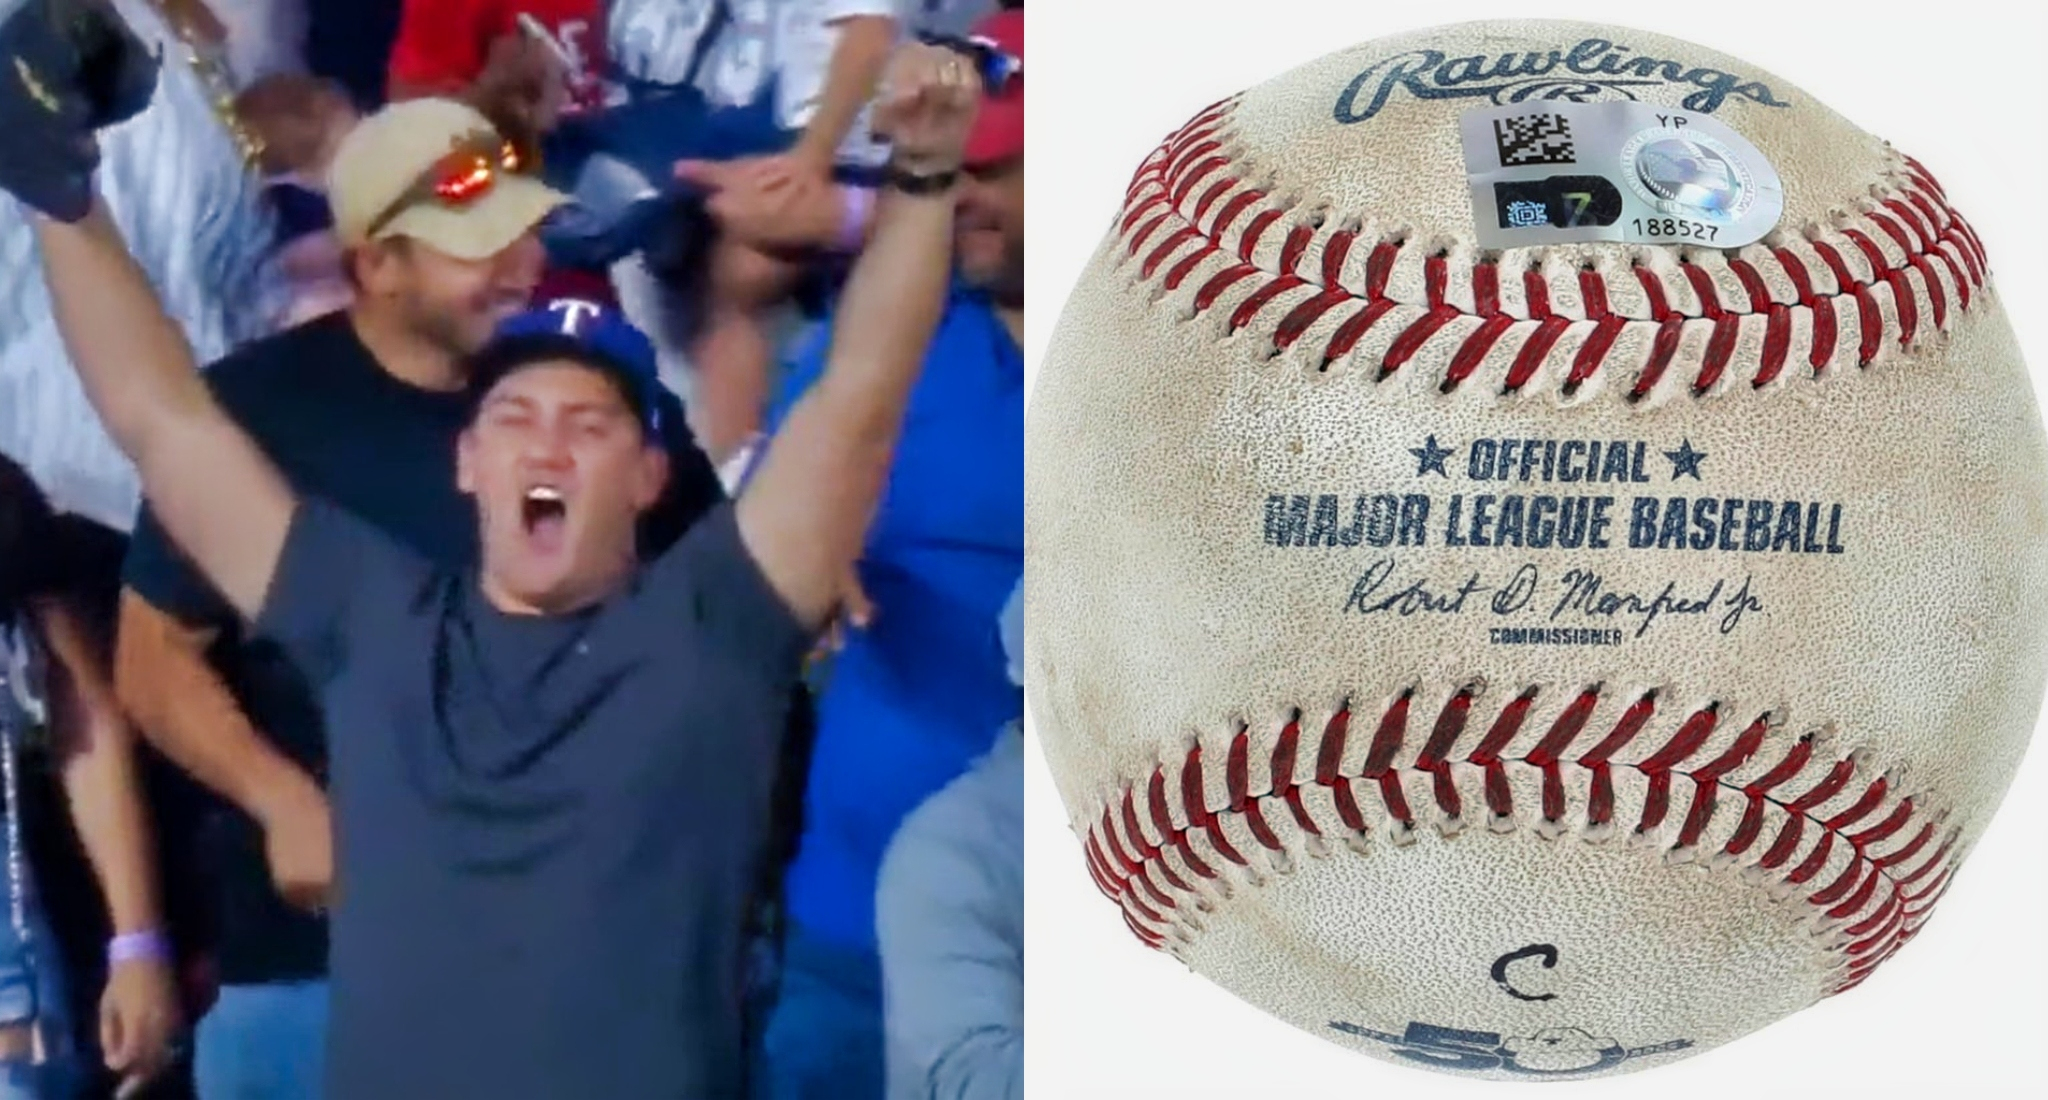 Husband of Dallas Cowboys reporter catches Aaron Judge HR ball